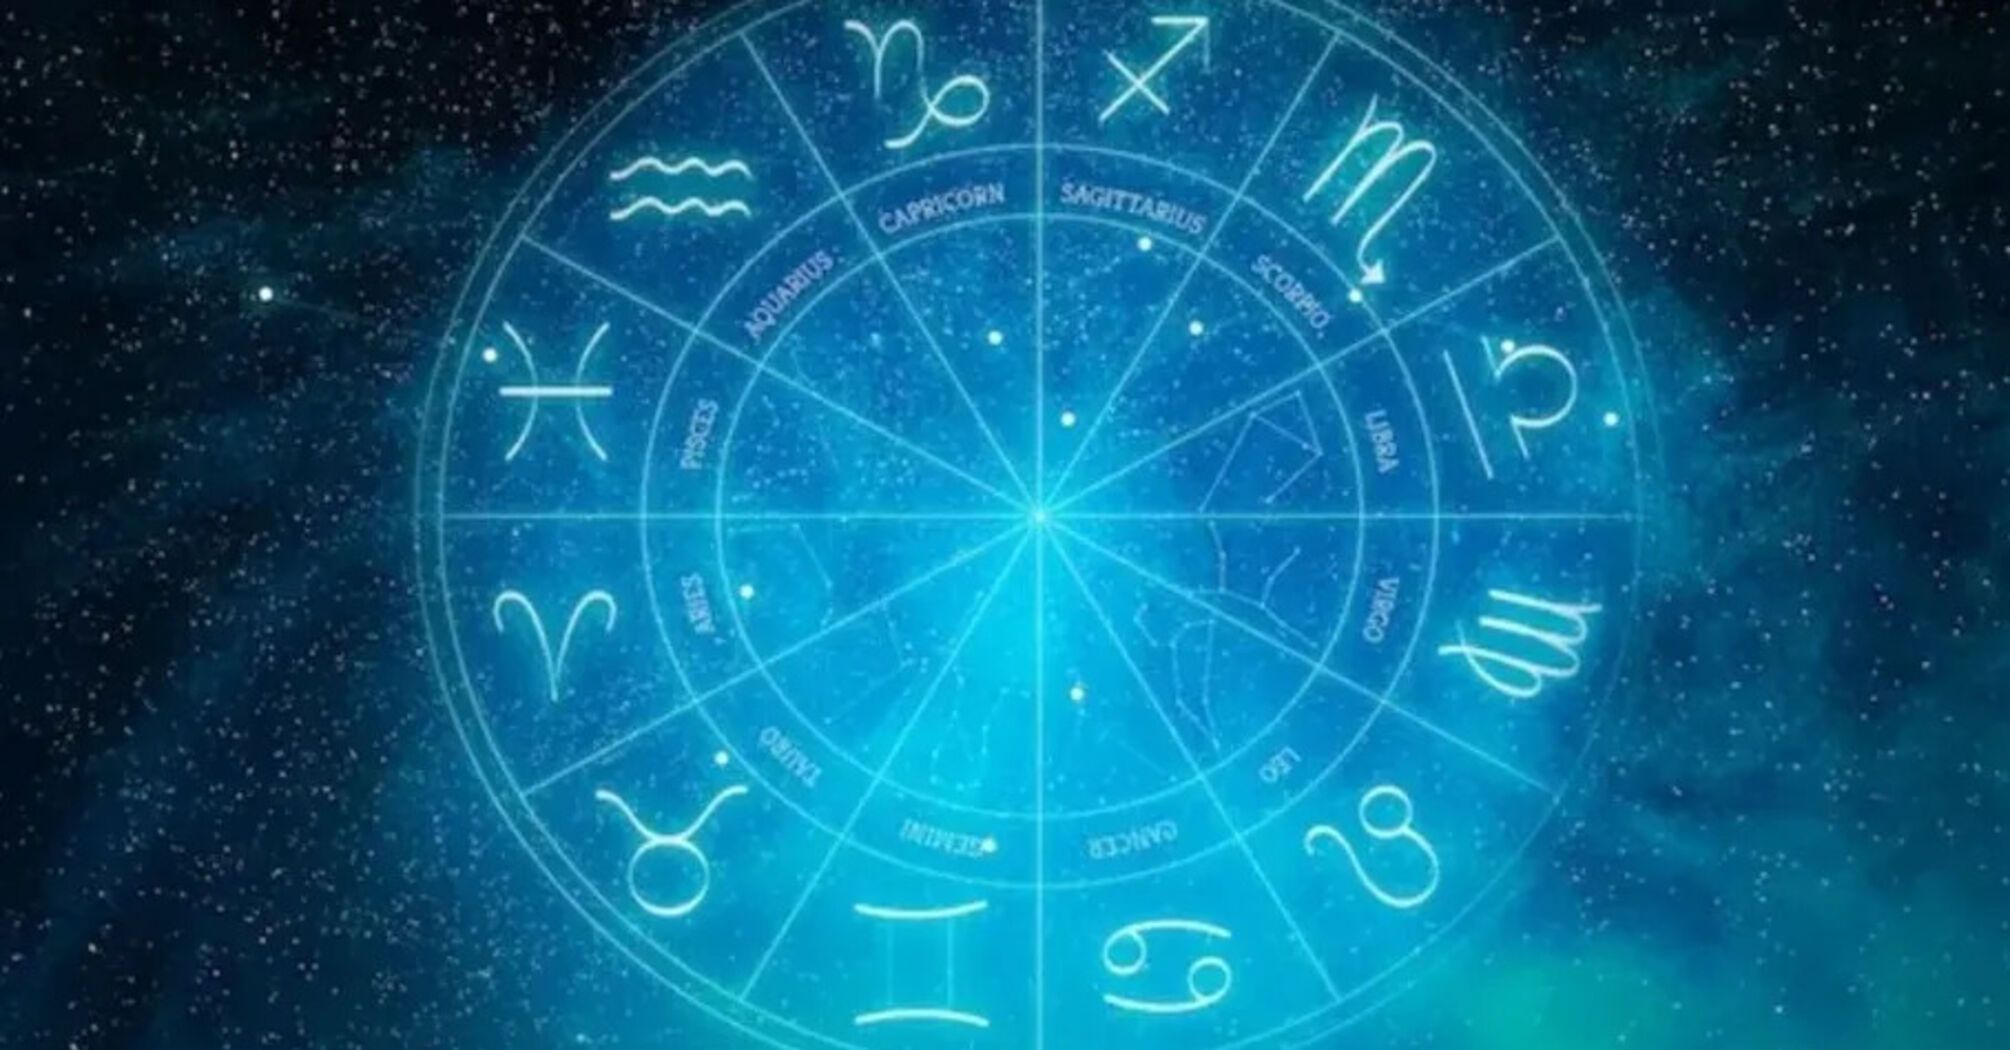 These five zodiac signs are likely to delve into romantic mood this year